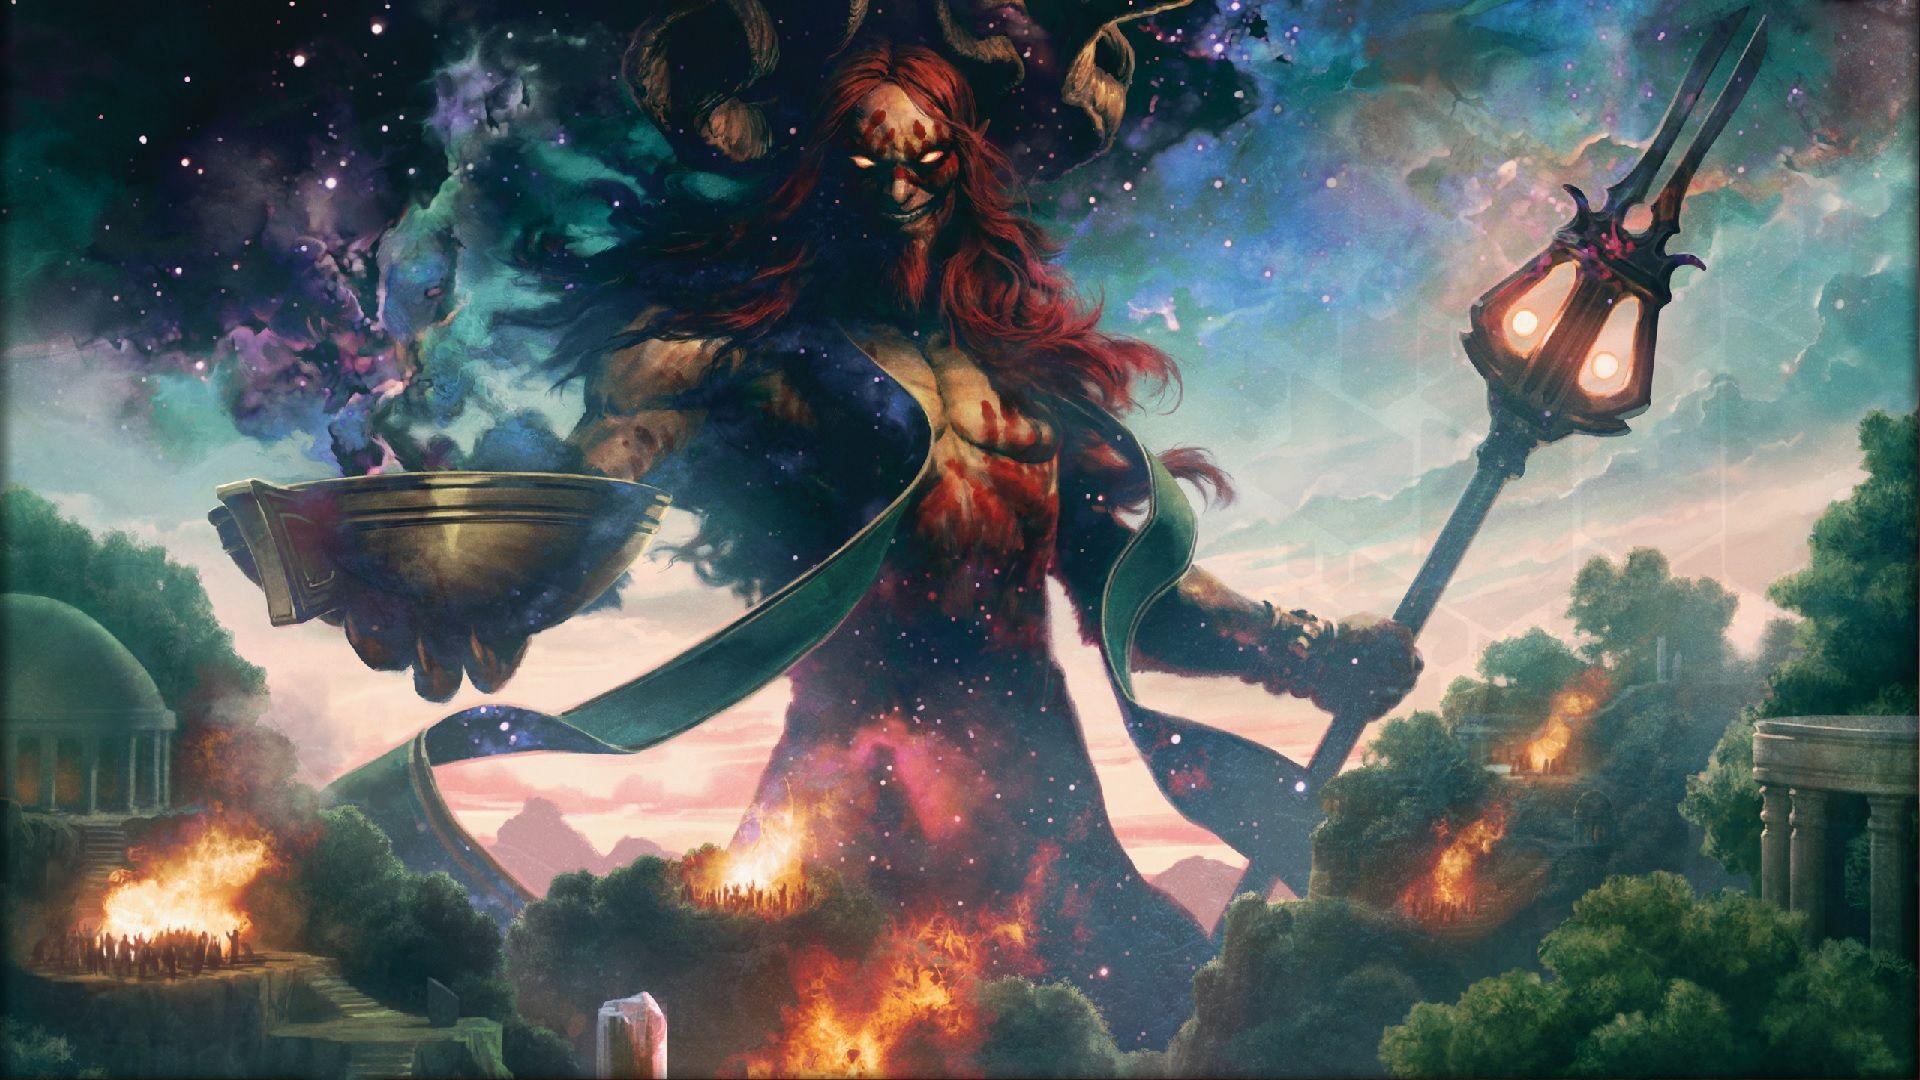 Magic: The Gathering Wallpaper, Picture, Image